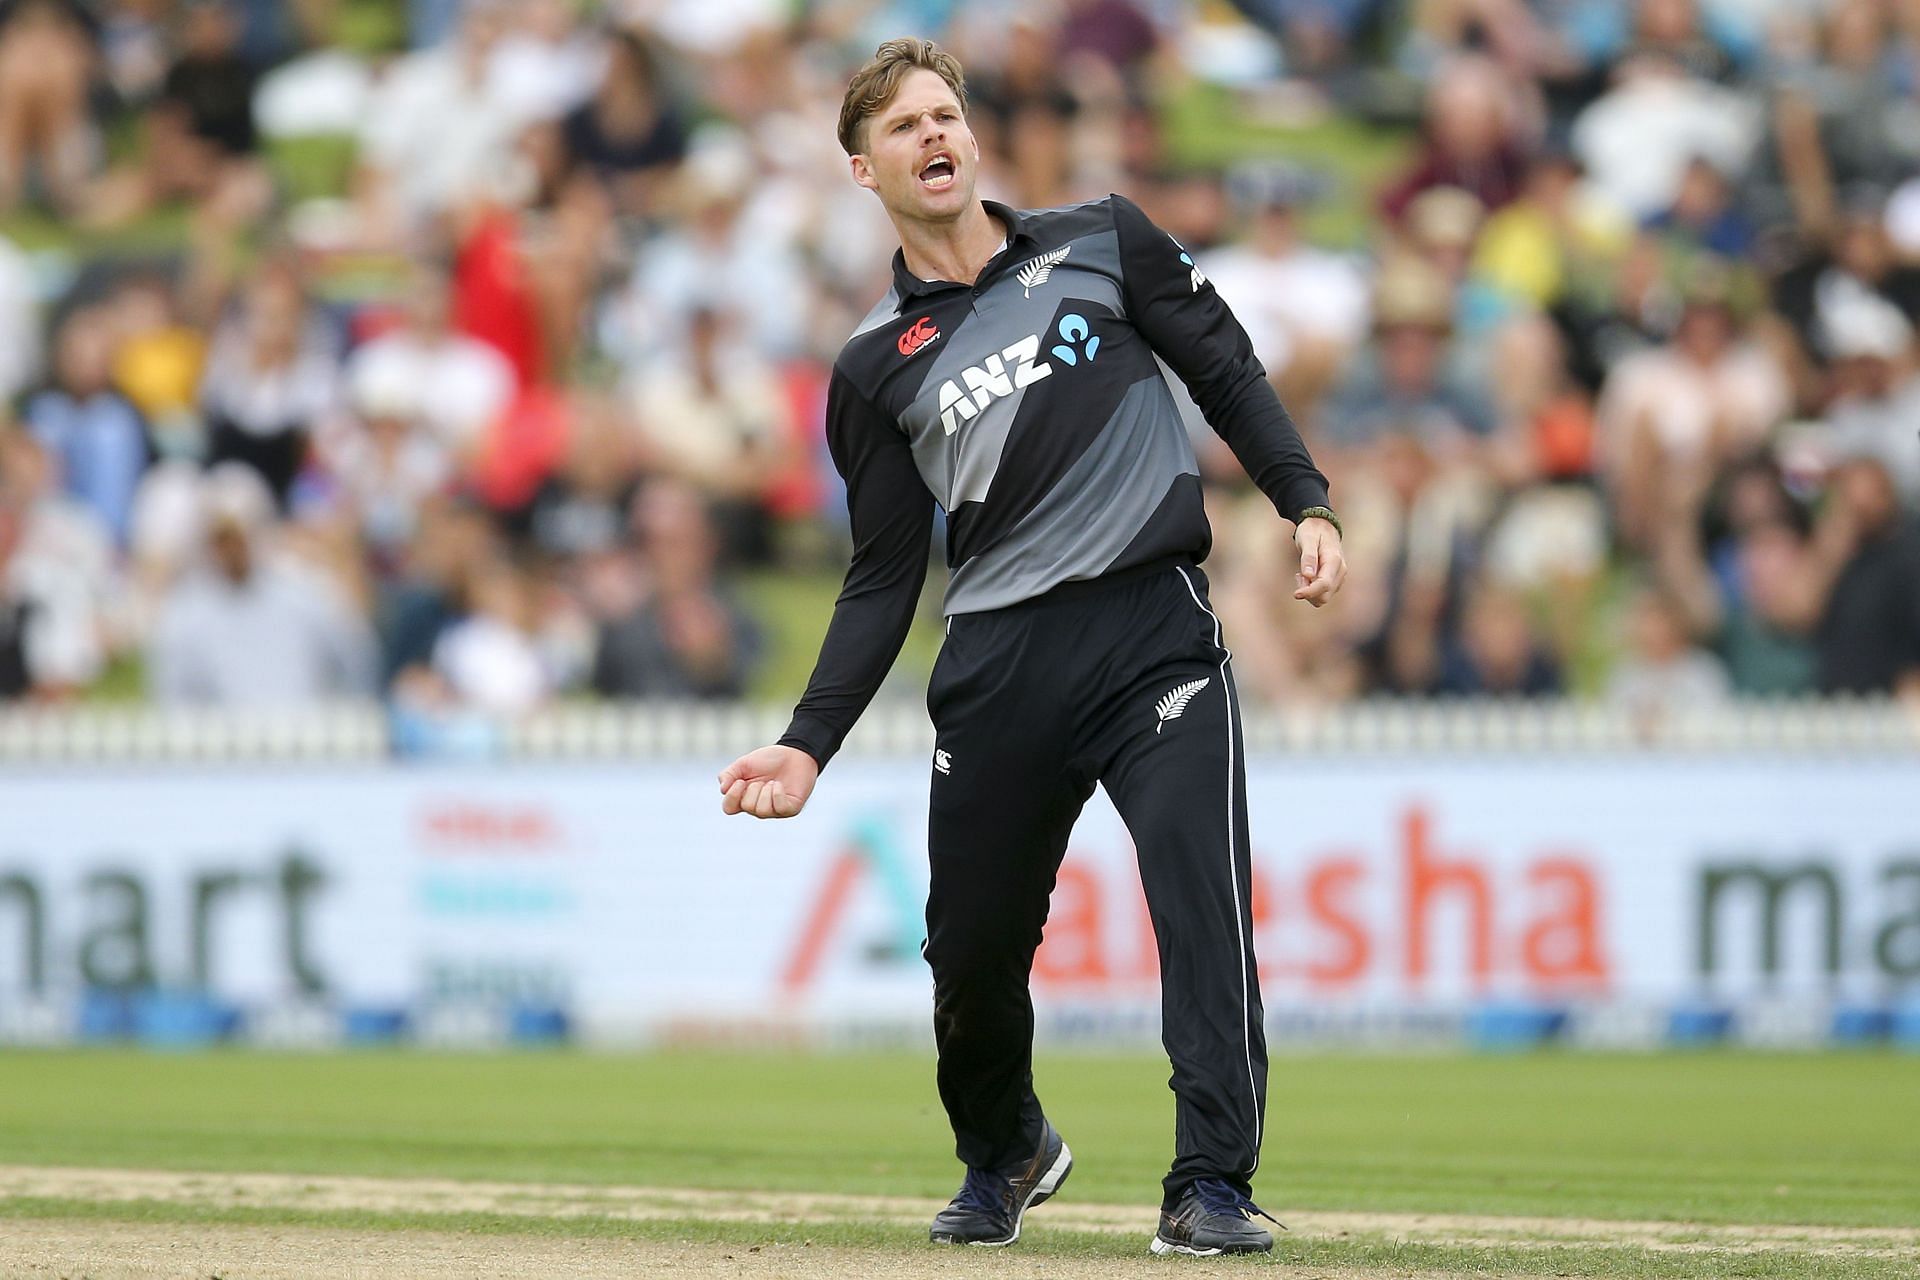 Lockie Ferguson has been ruled out of ICC T20 World Cup 2021